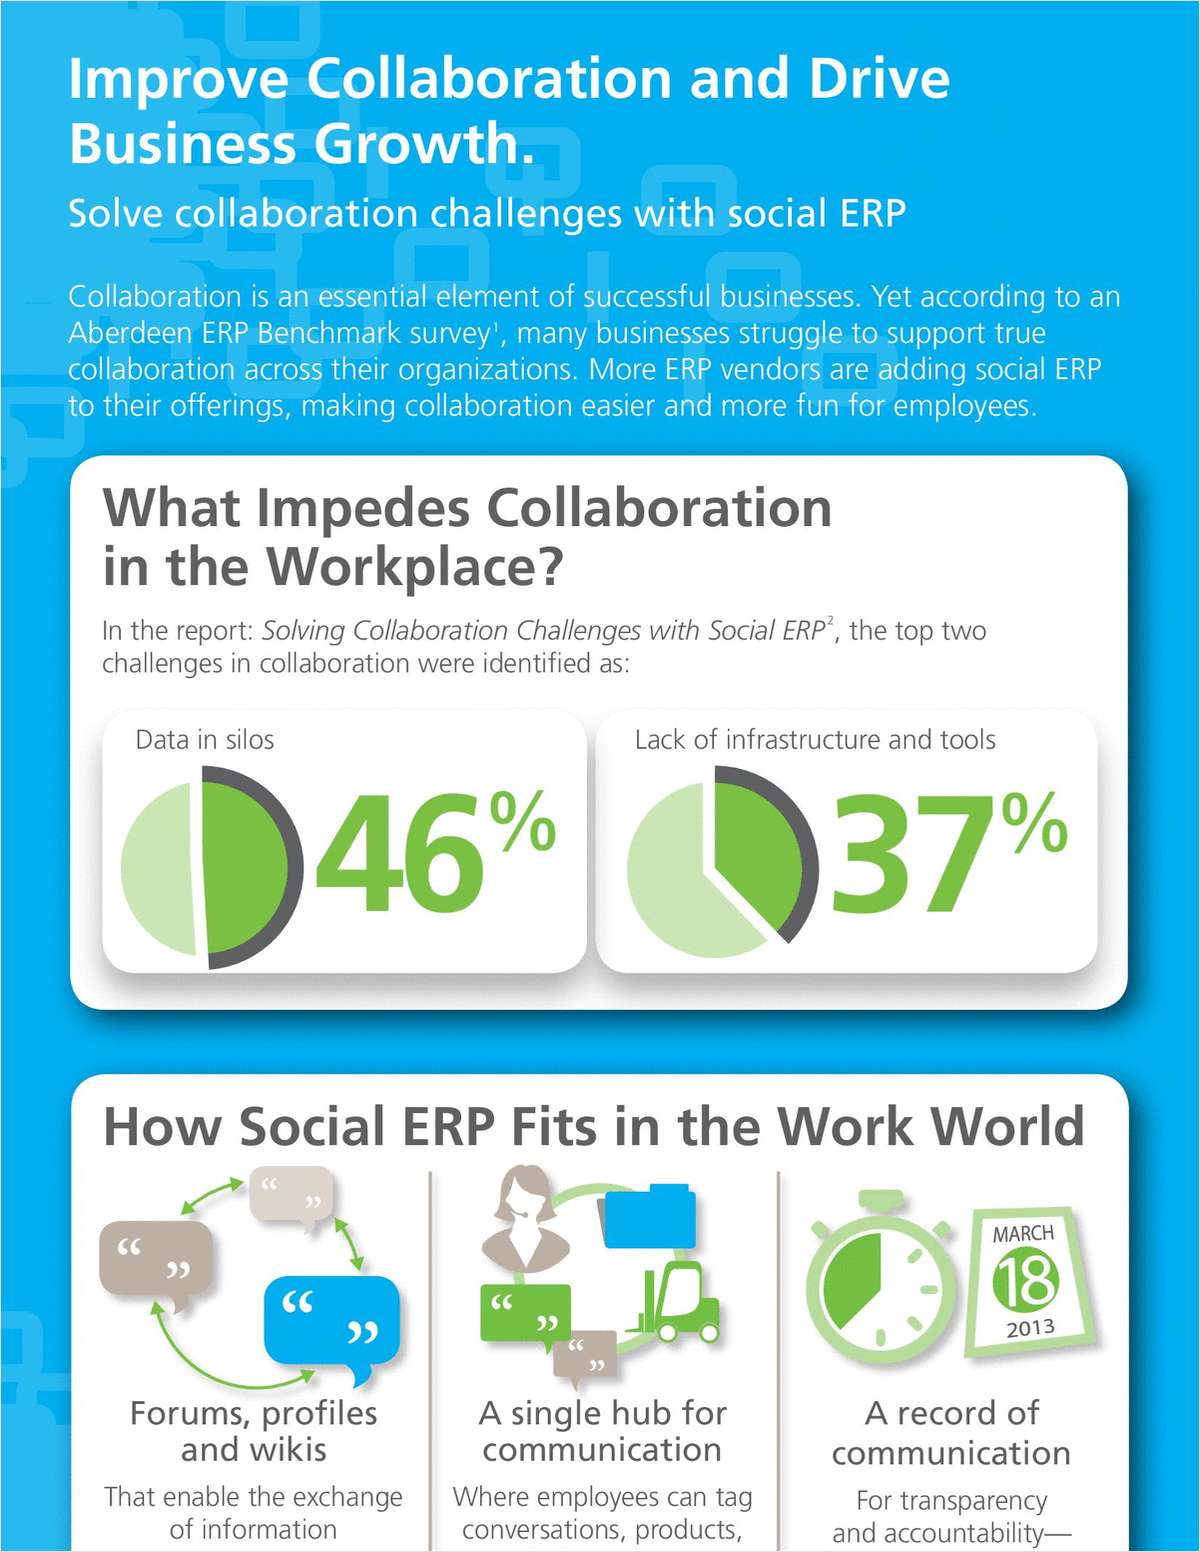 Improve Collaboration and Drive Business Growth